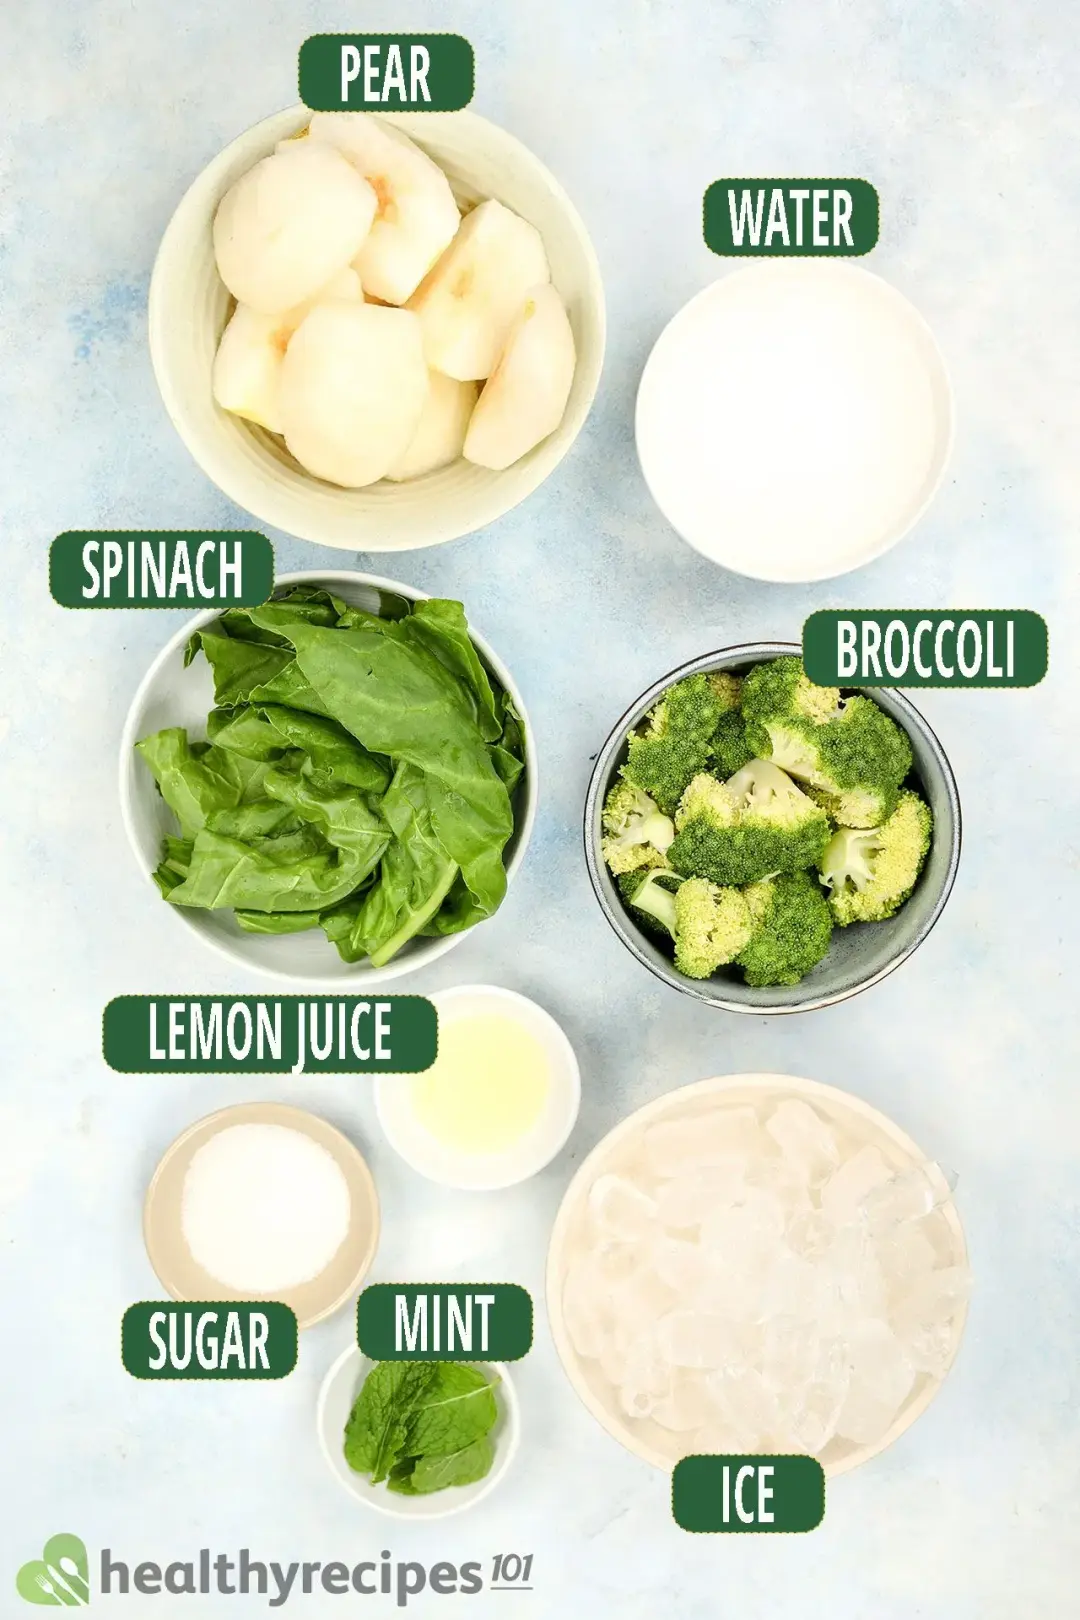 Ingredients in separate bowls: peeled and quartered pears, sugar, water, broccoli, spinach, mints, and ice nuggets